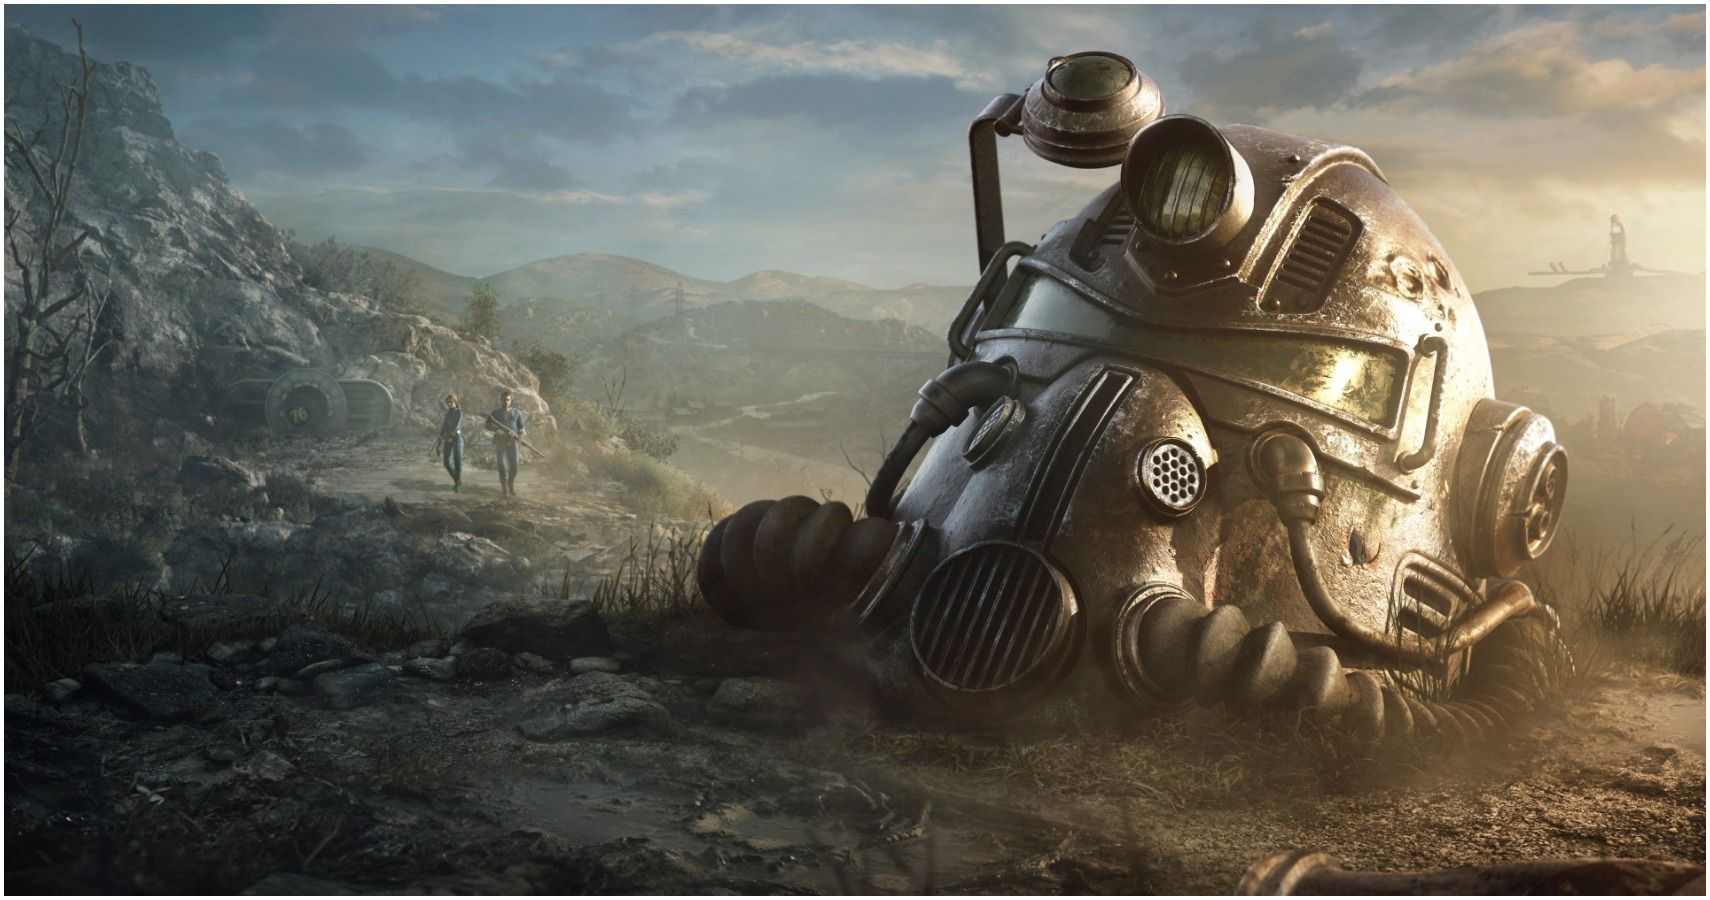 Bethesdas Problems Continue With Support Site Leak Disclosing Fallout 76 Players Personal Data